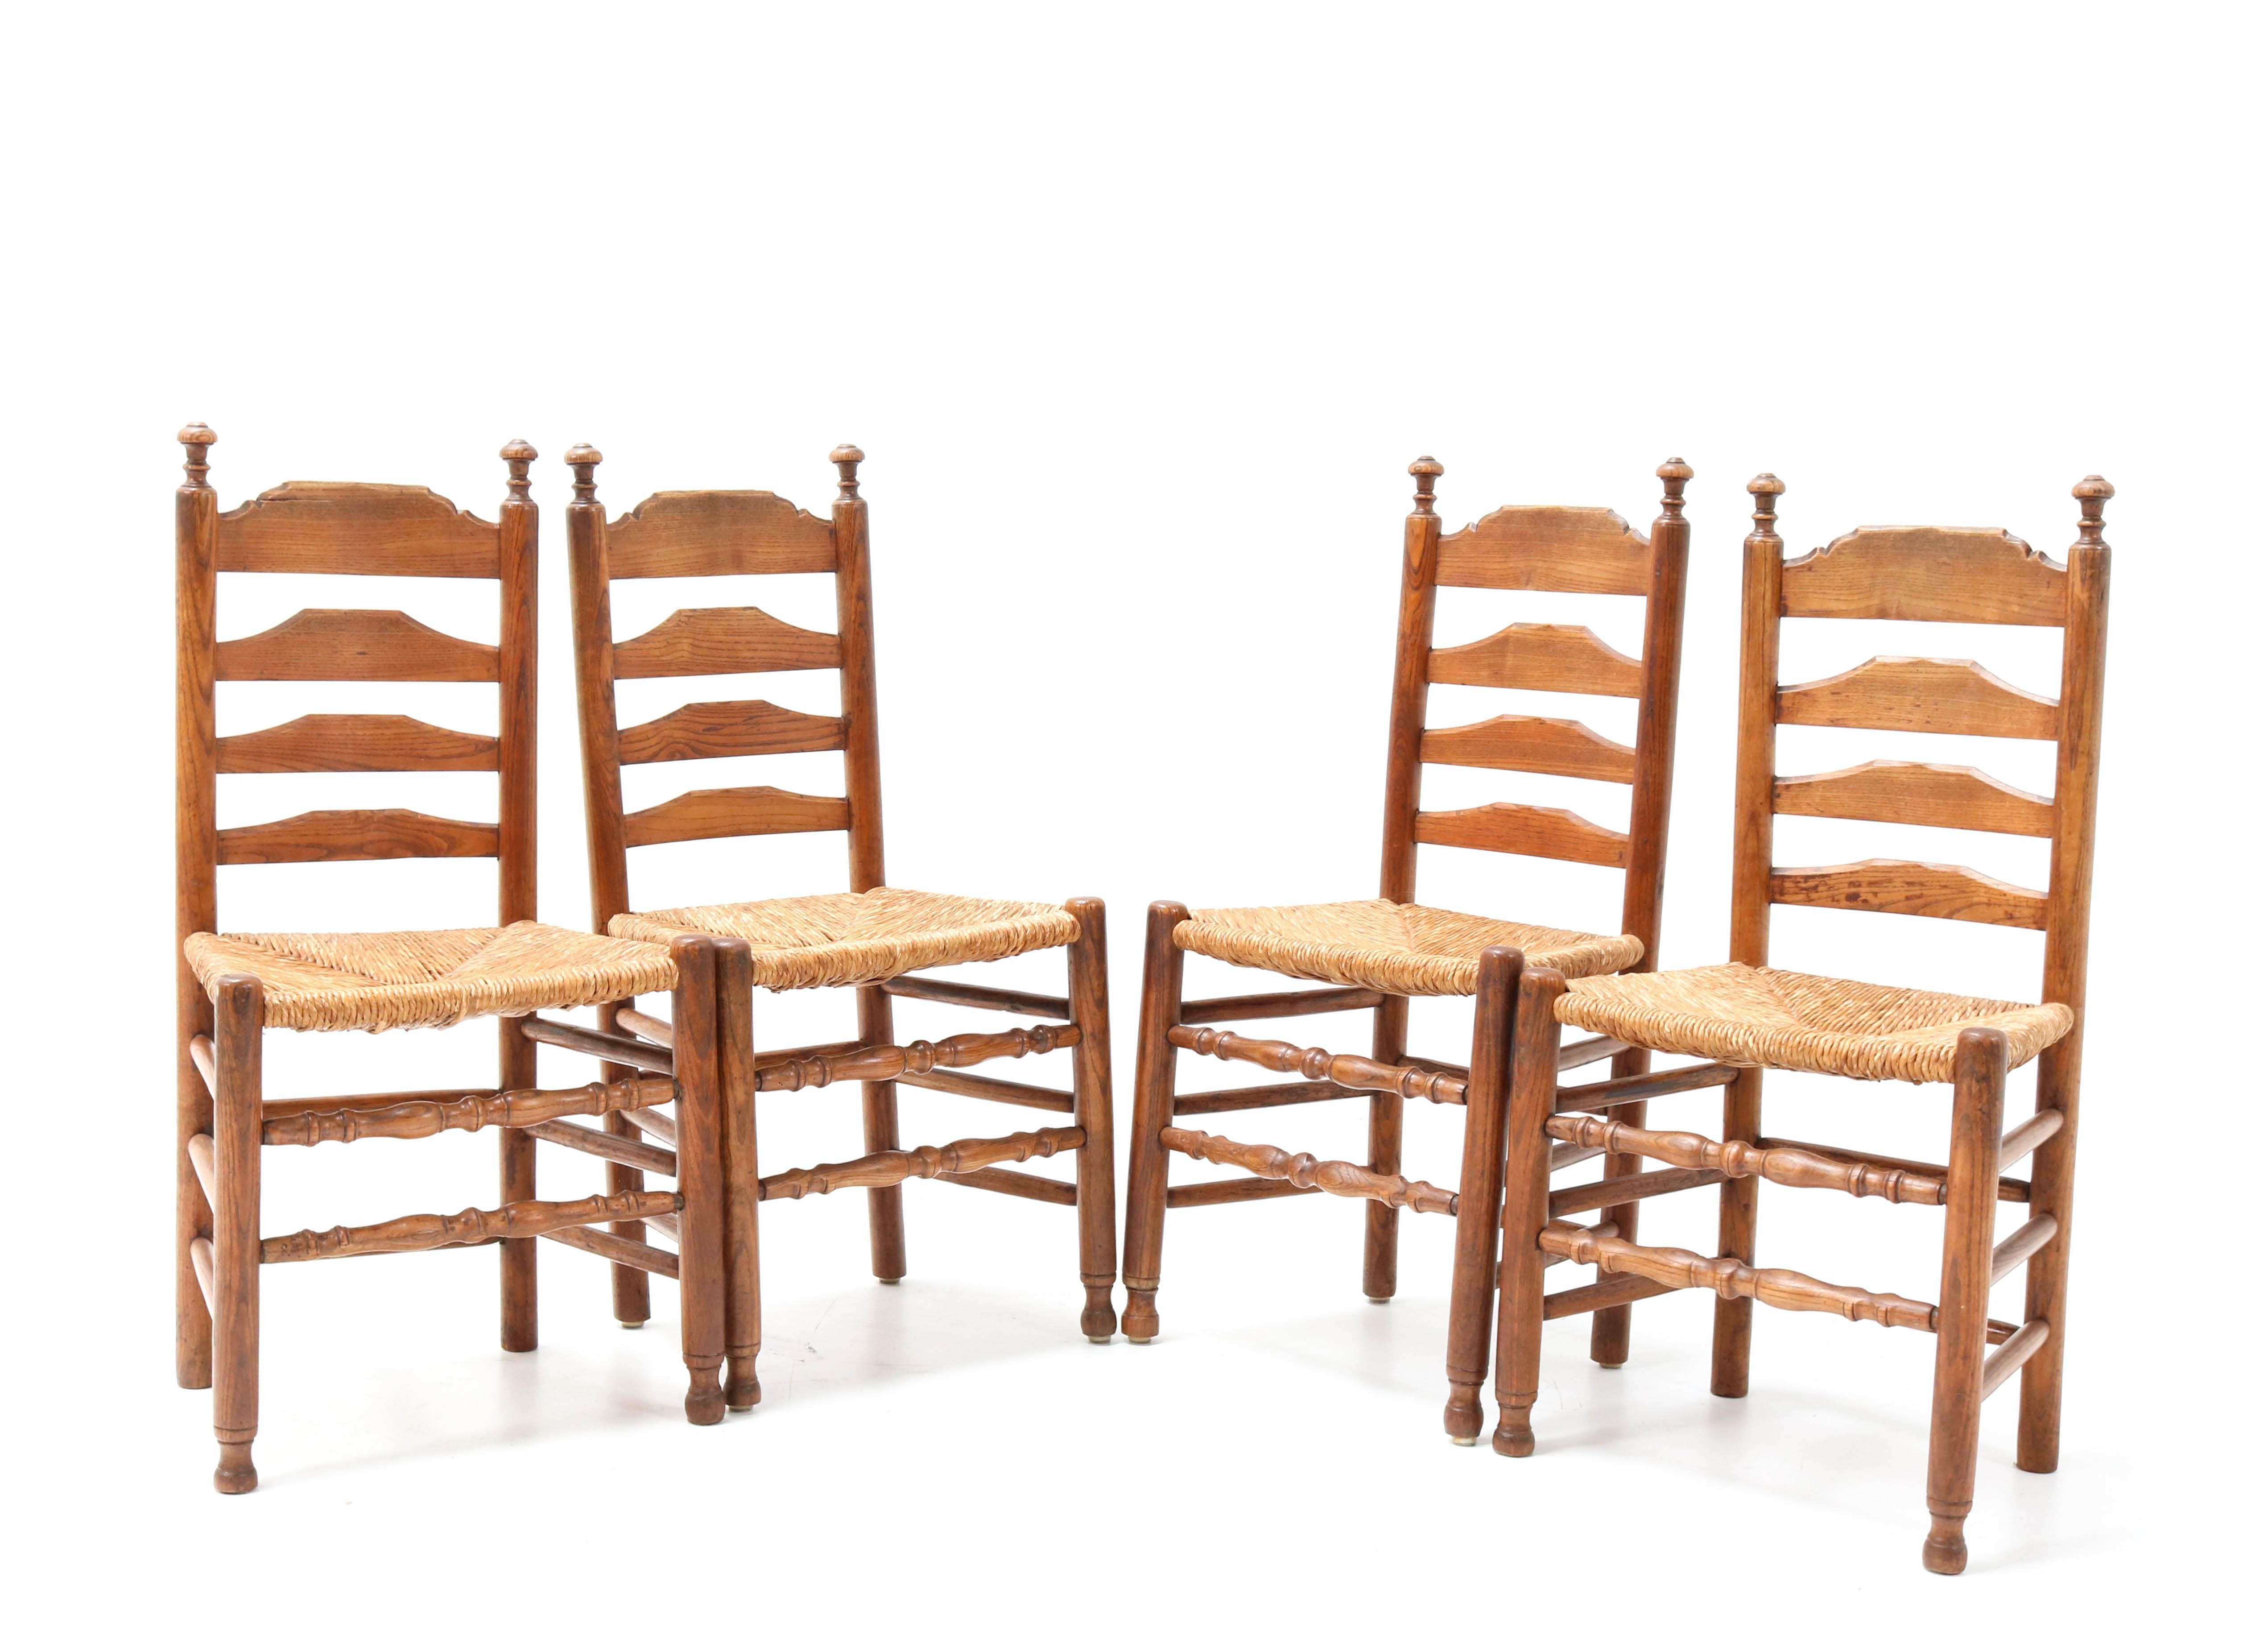 Other Four Elmwood Dutch Provincial Ladder-Back Chairs, 1880s